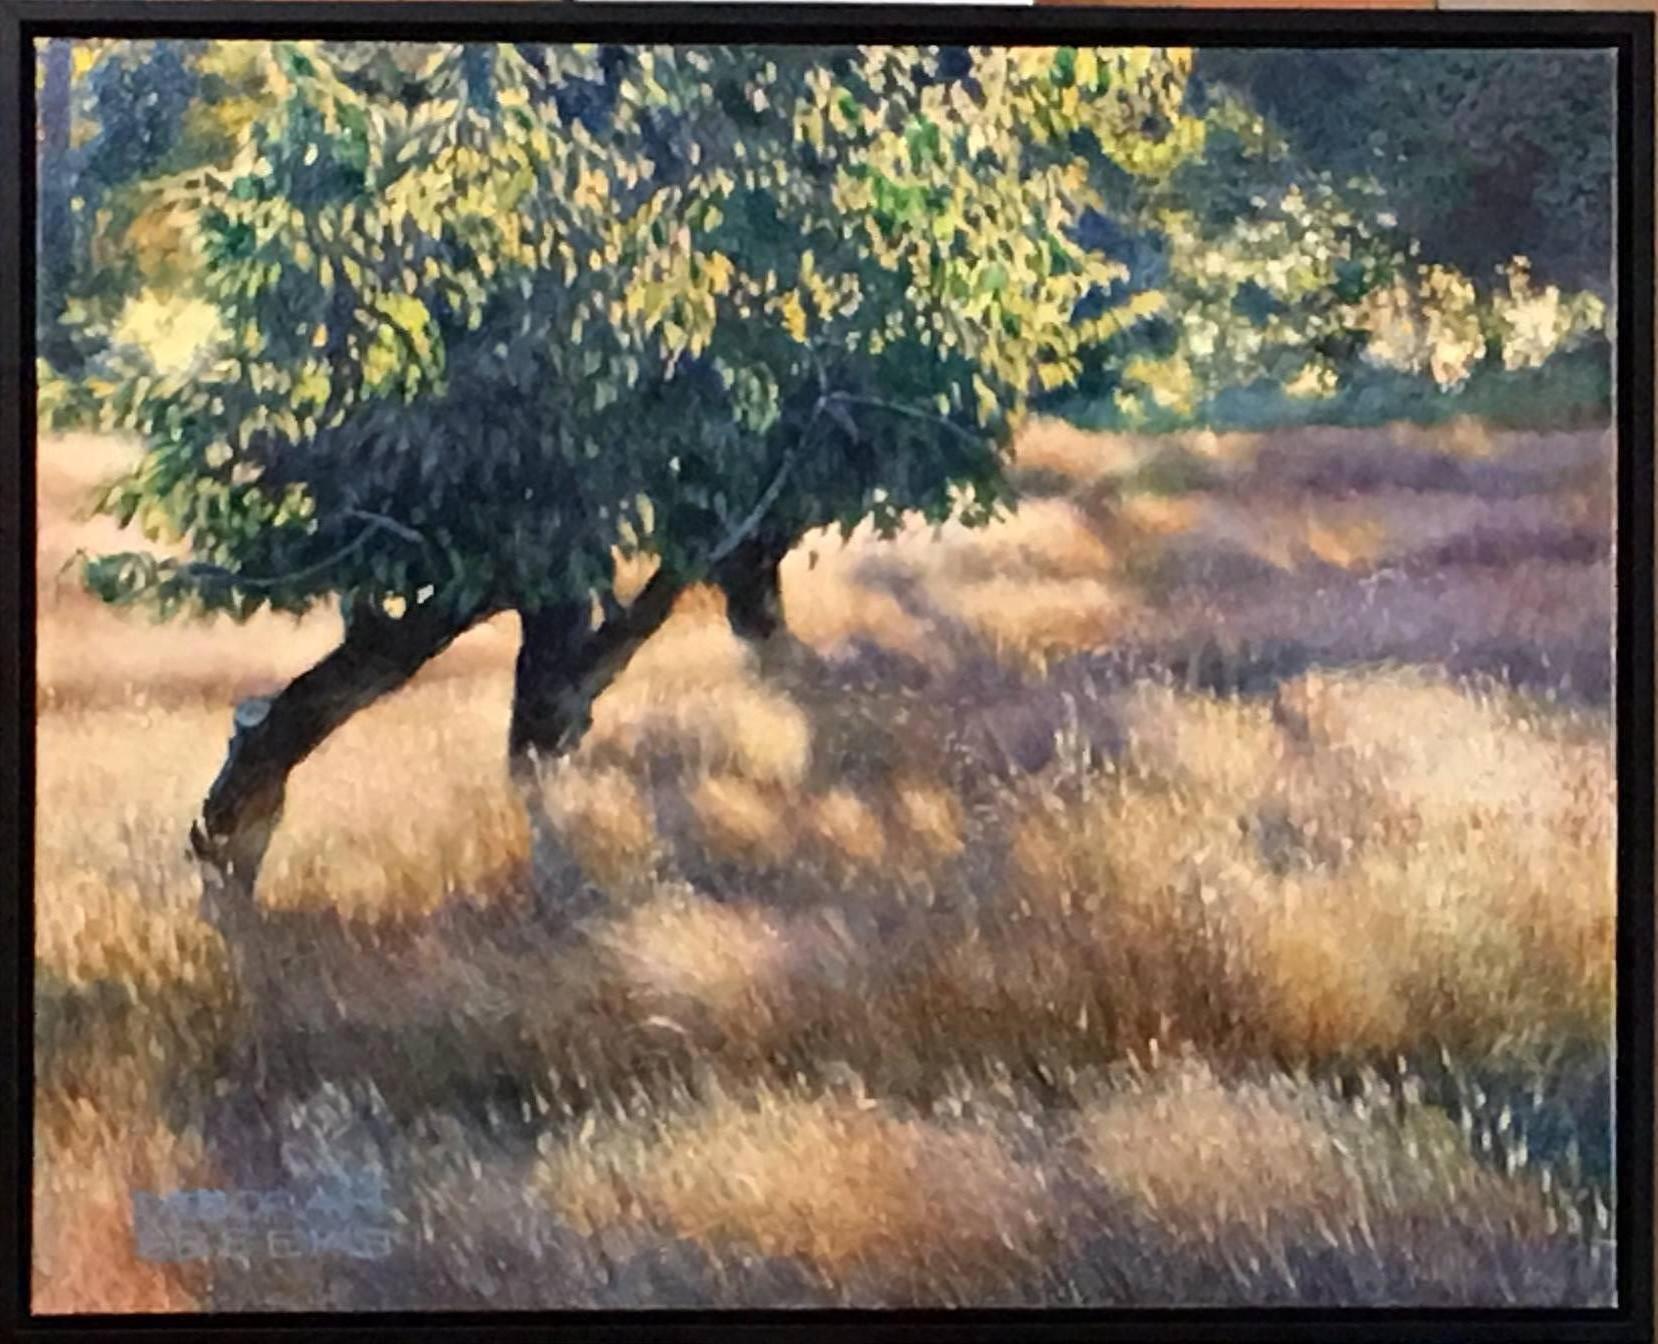 Sunrise - Field and Trees Basked in Bright Morning Light, Oil on Canvas Painting (Grau), Landscape Painting, von Deborah Ebbers